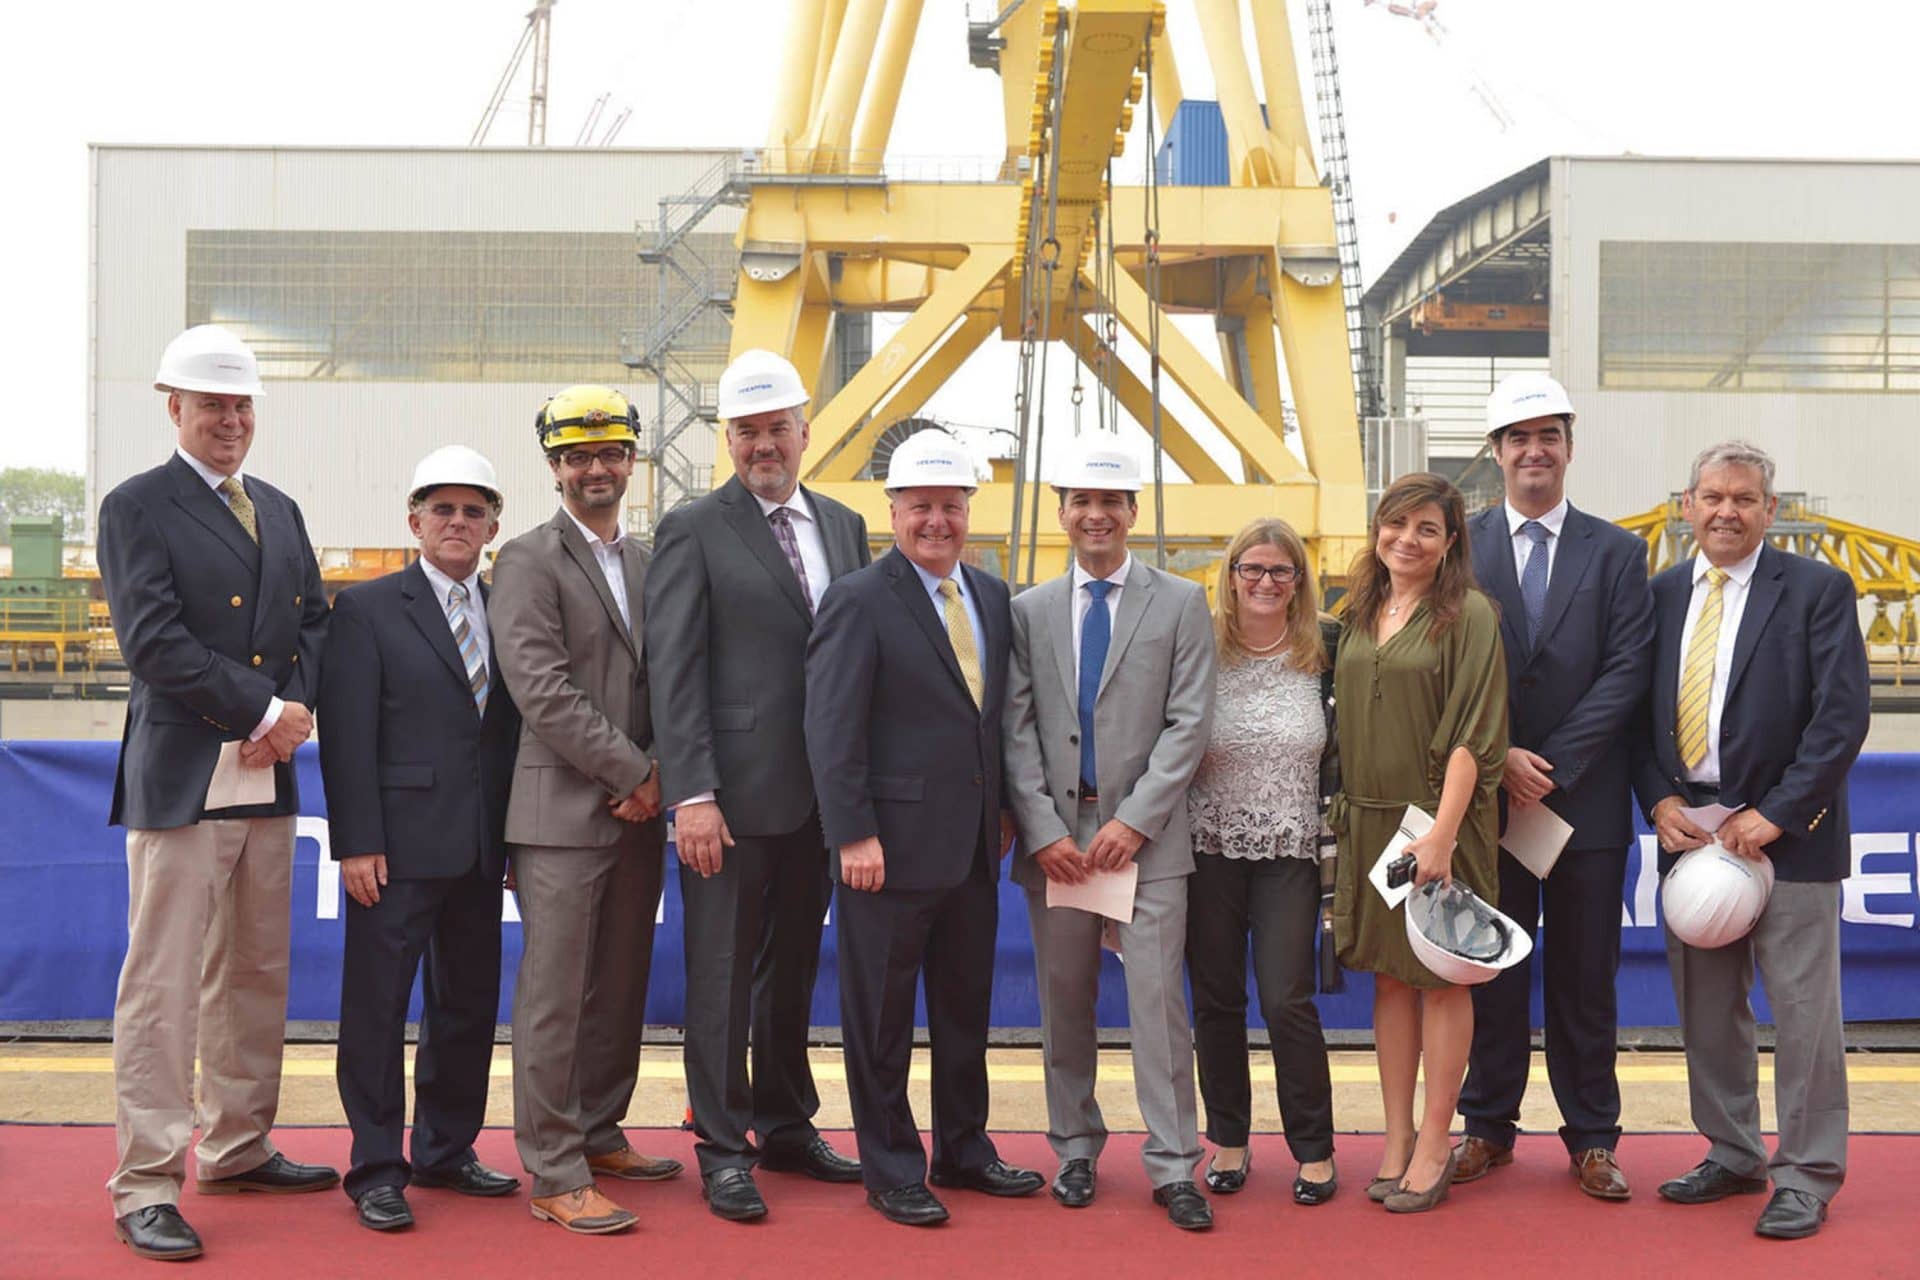 Seabourn Keel Laying Ceremony